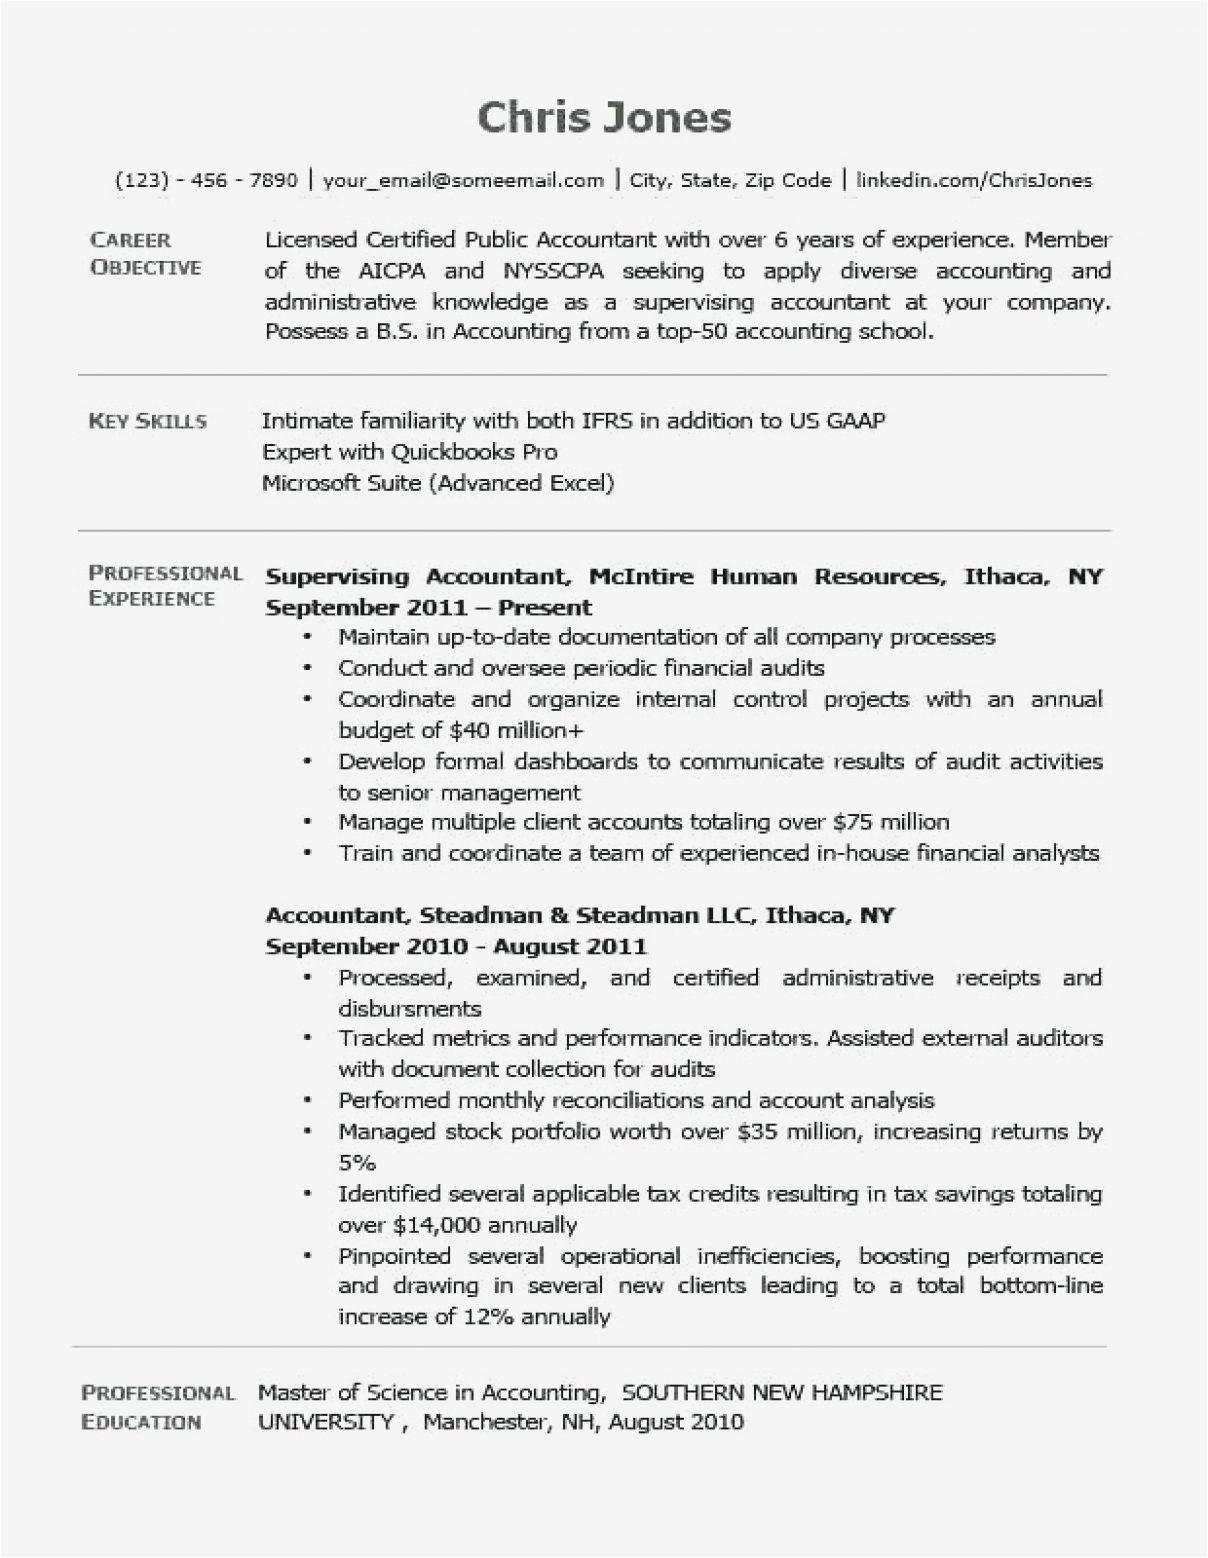 Sample Resume Objectives for Human Resources Human Resources Resume Objectives Job Objective In Resumes